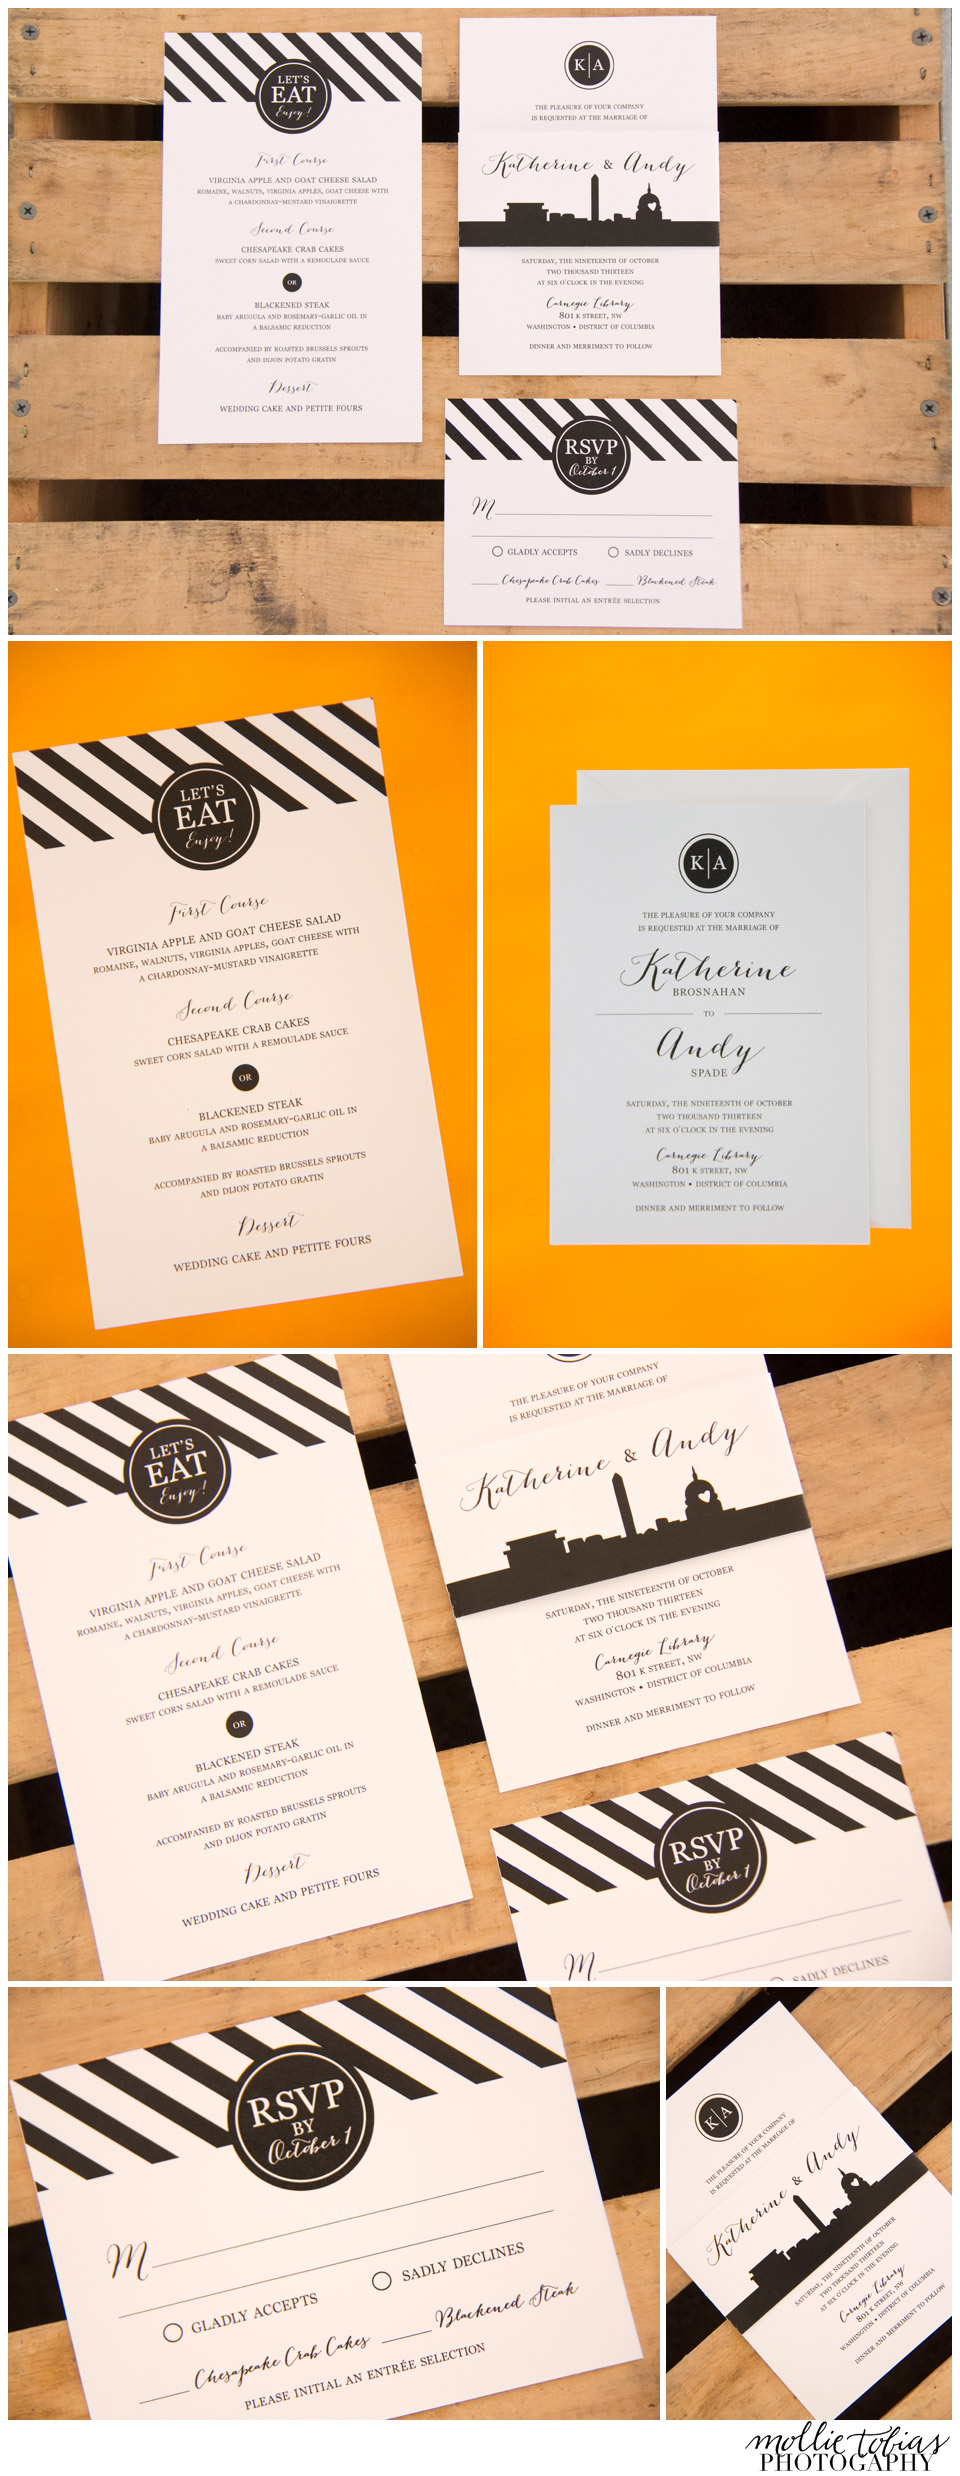 mollie-tobias-VA-MD-DC-wedding-photography-DC-Ladies-styled-shoot-paper-goods-stationary